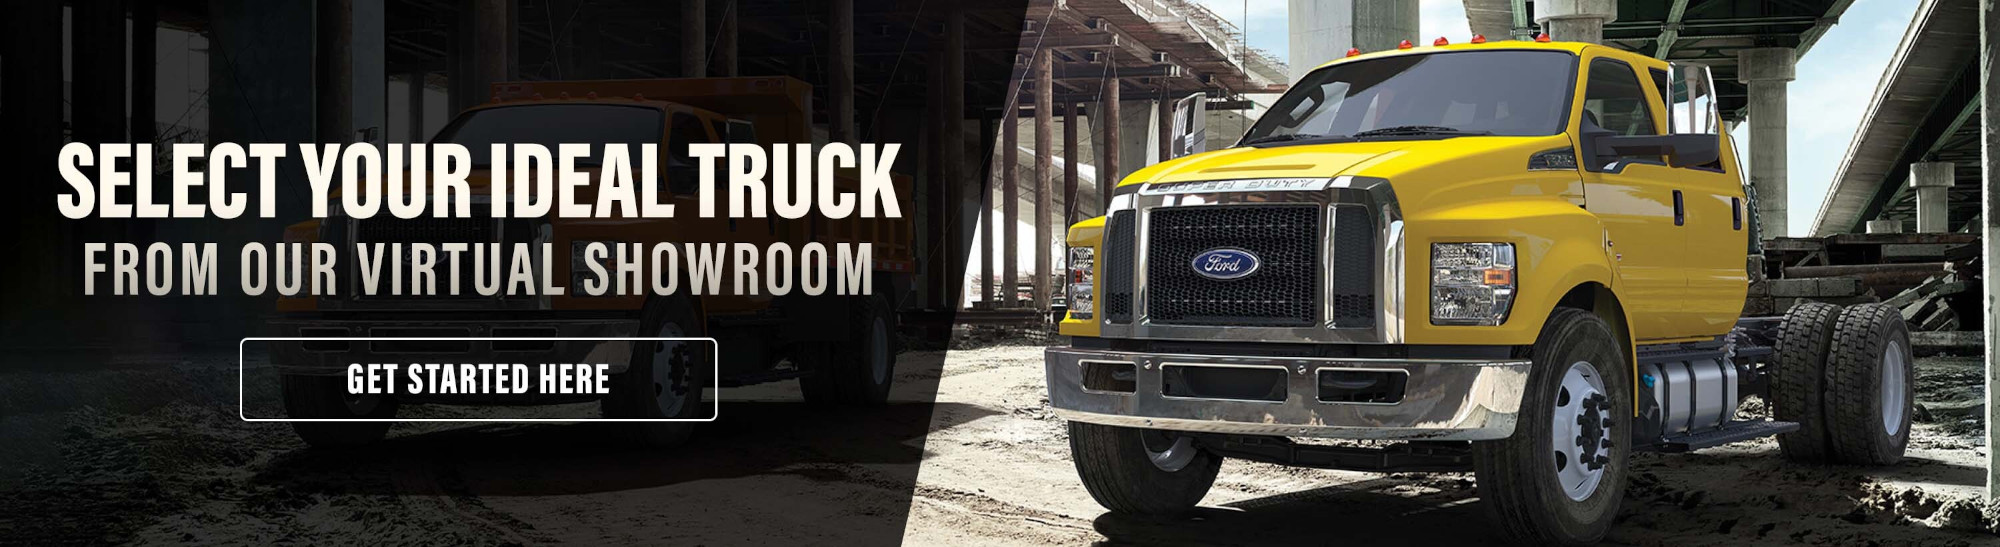 Select Your Ideal Truck from our virtual showroom. Get Started Here.